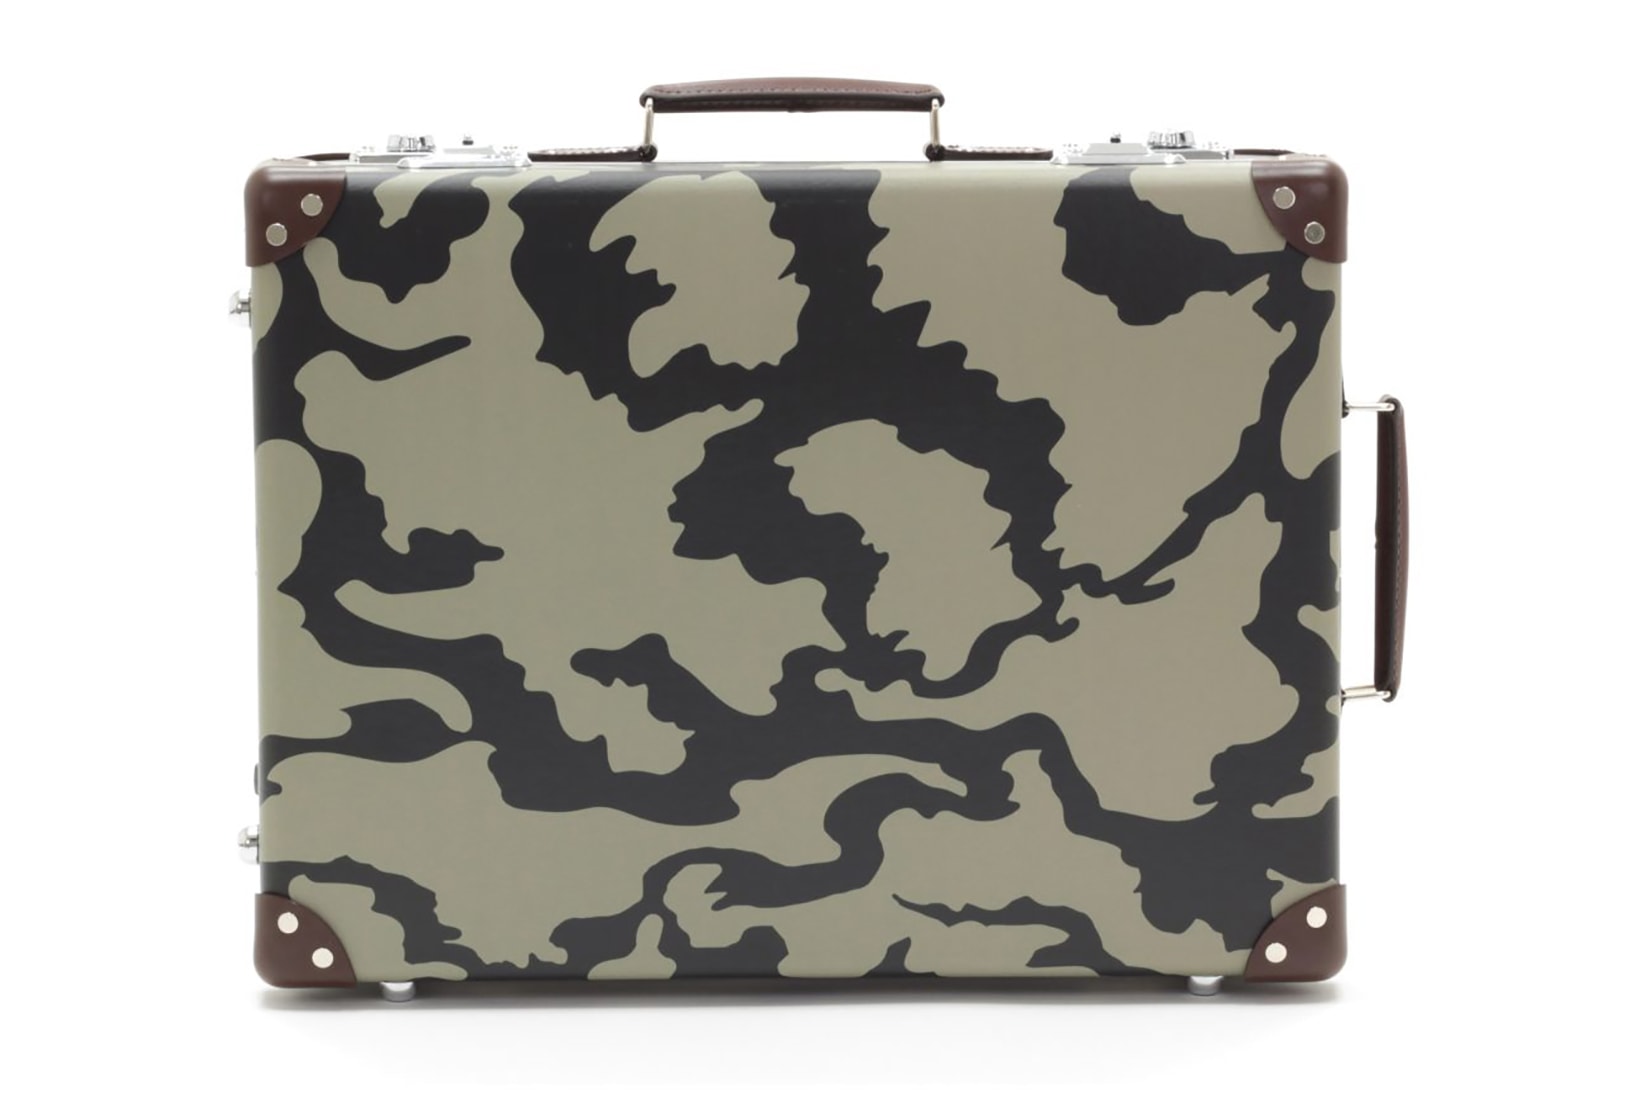 Globe-Trotter Camouflage Print Luggage Imagery for Spitfire's 80th Anniversary